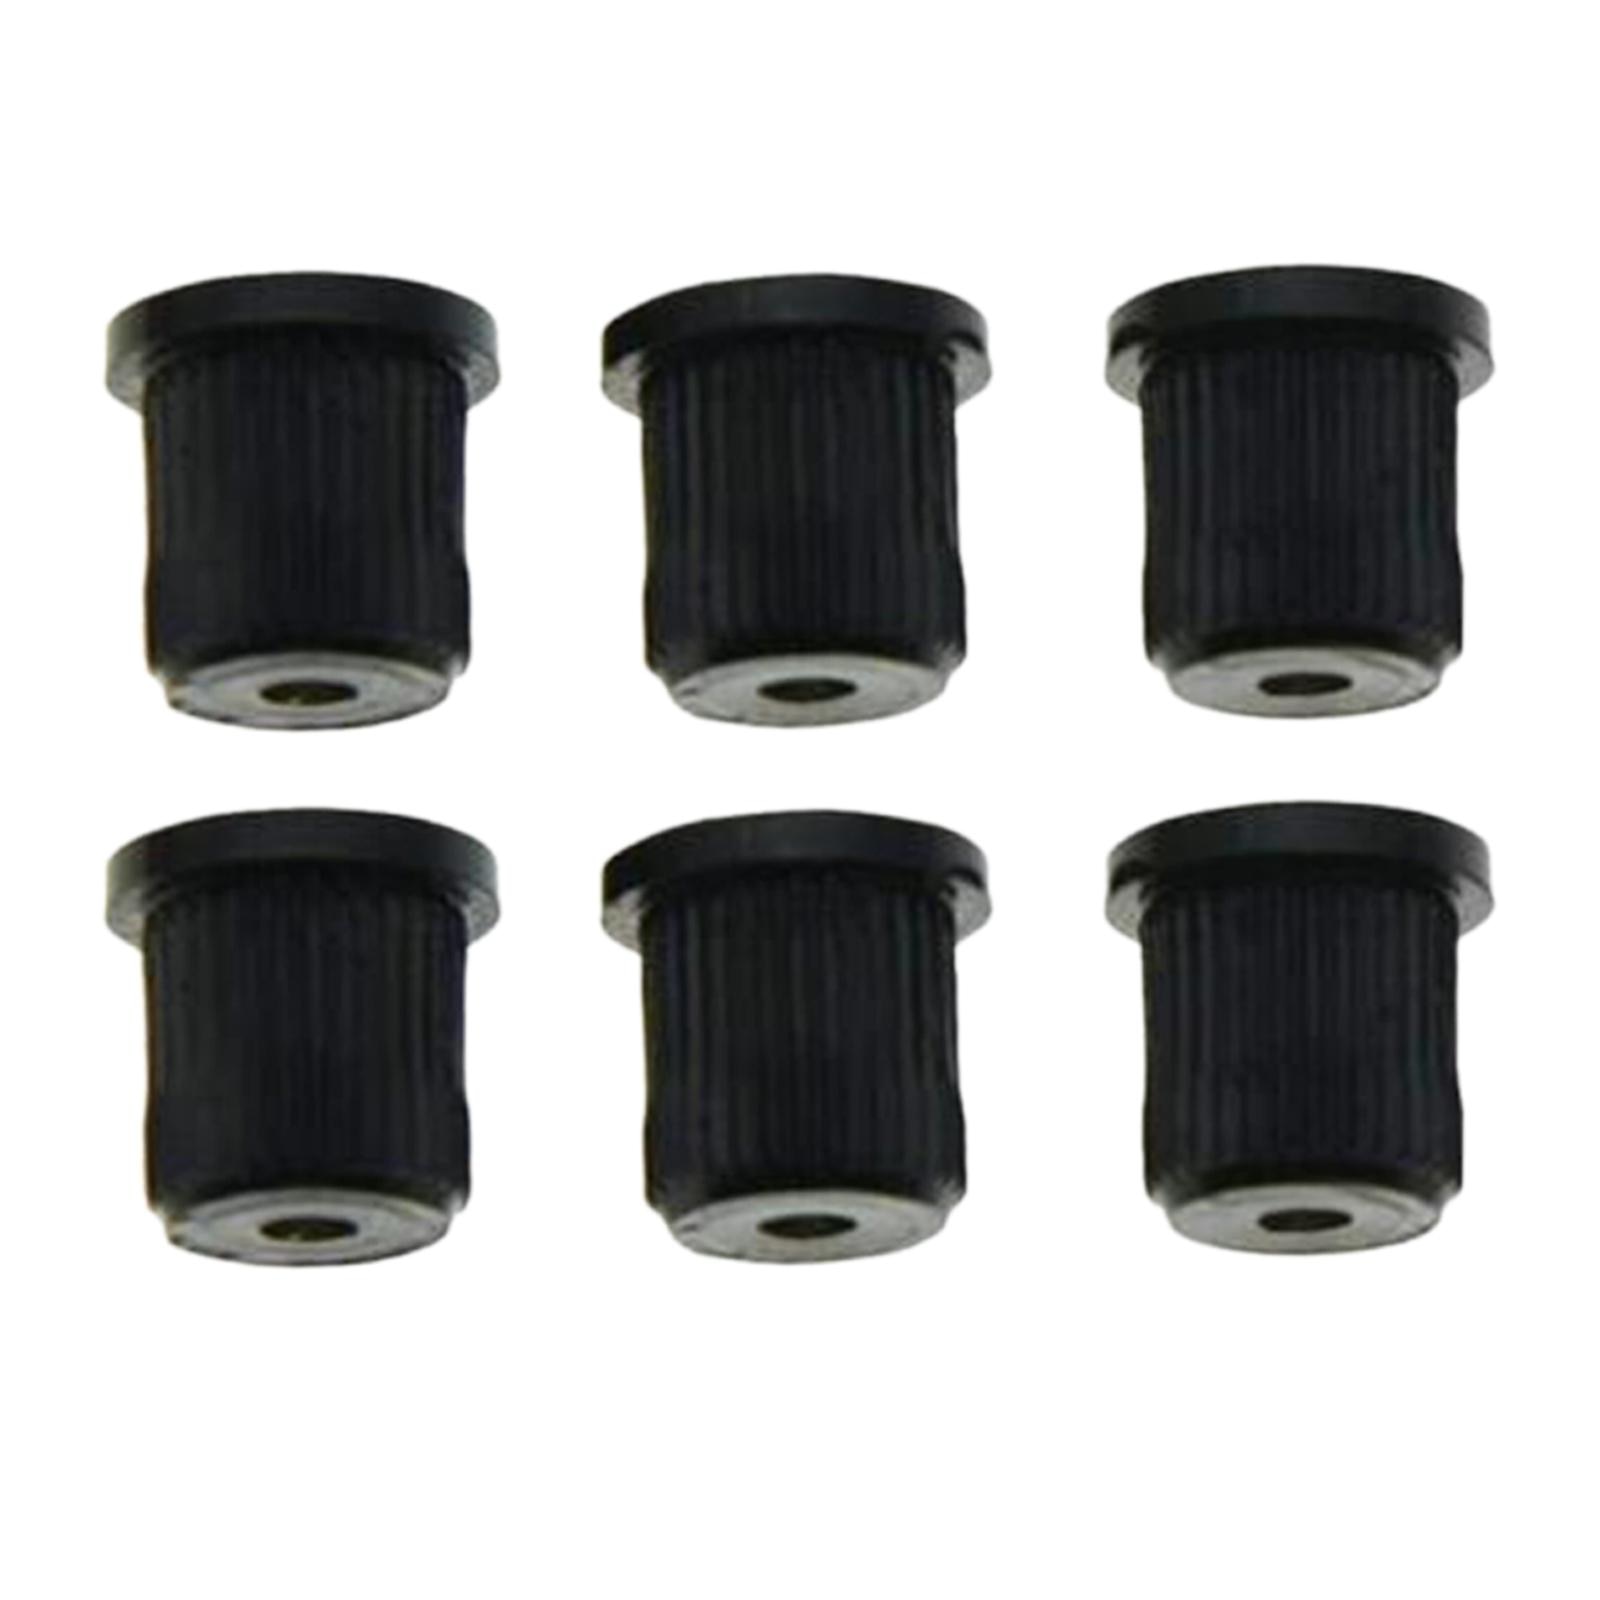 6x Guitar String Grommet Ferrule Assembly Replacement Part for Electric Guitar